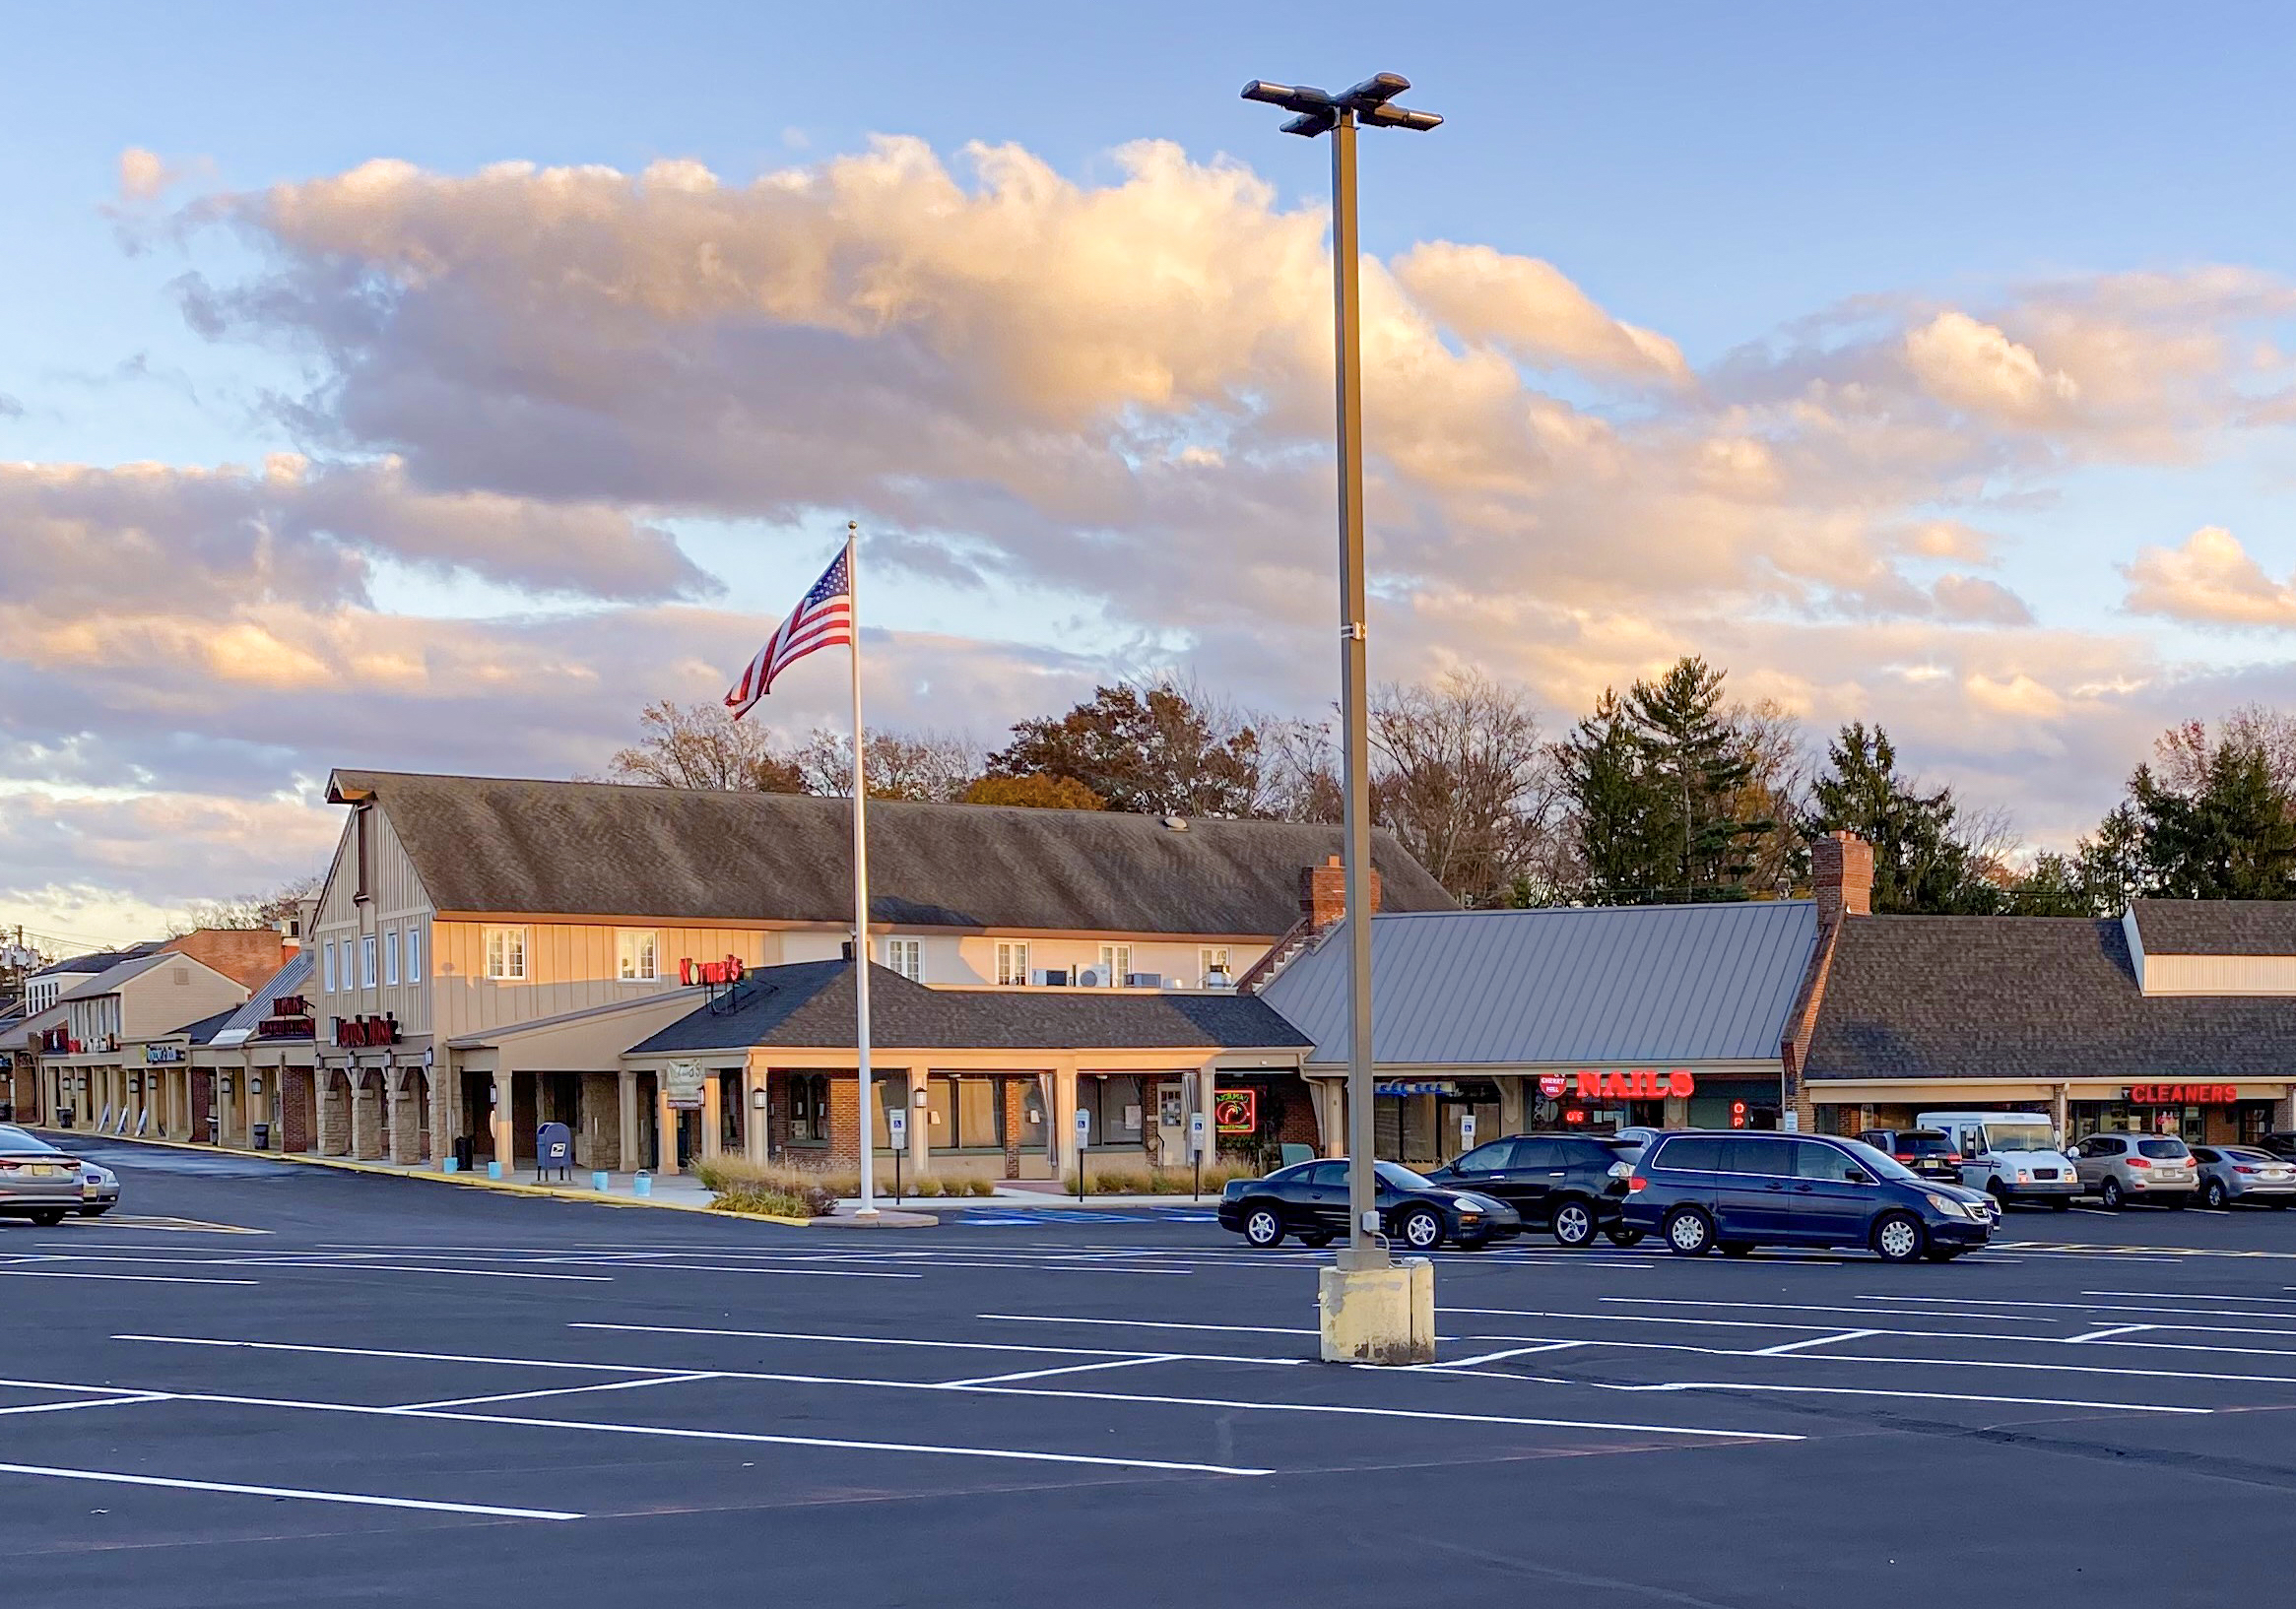 Buildings and parking lot in the Barclay Farms shopping center